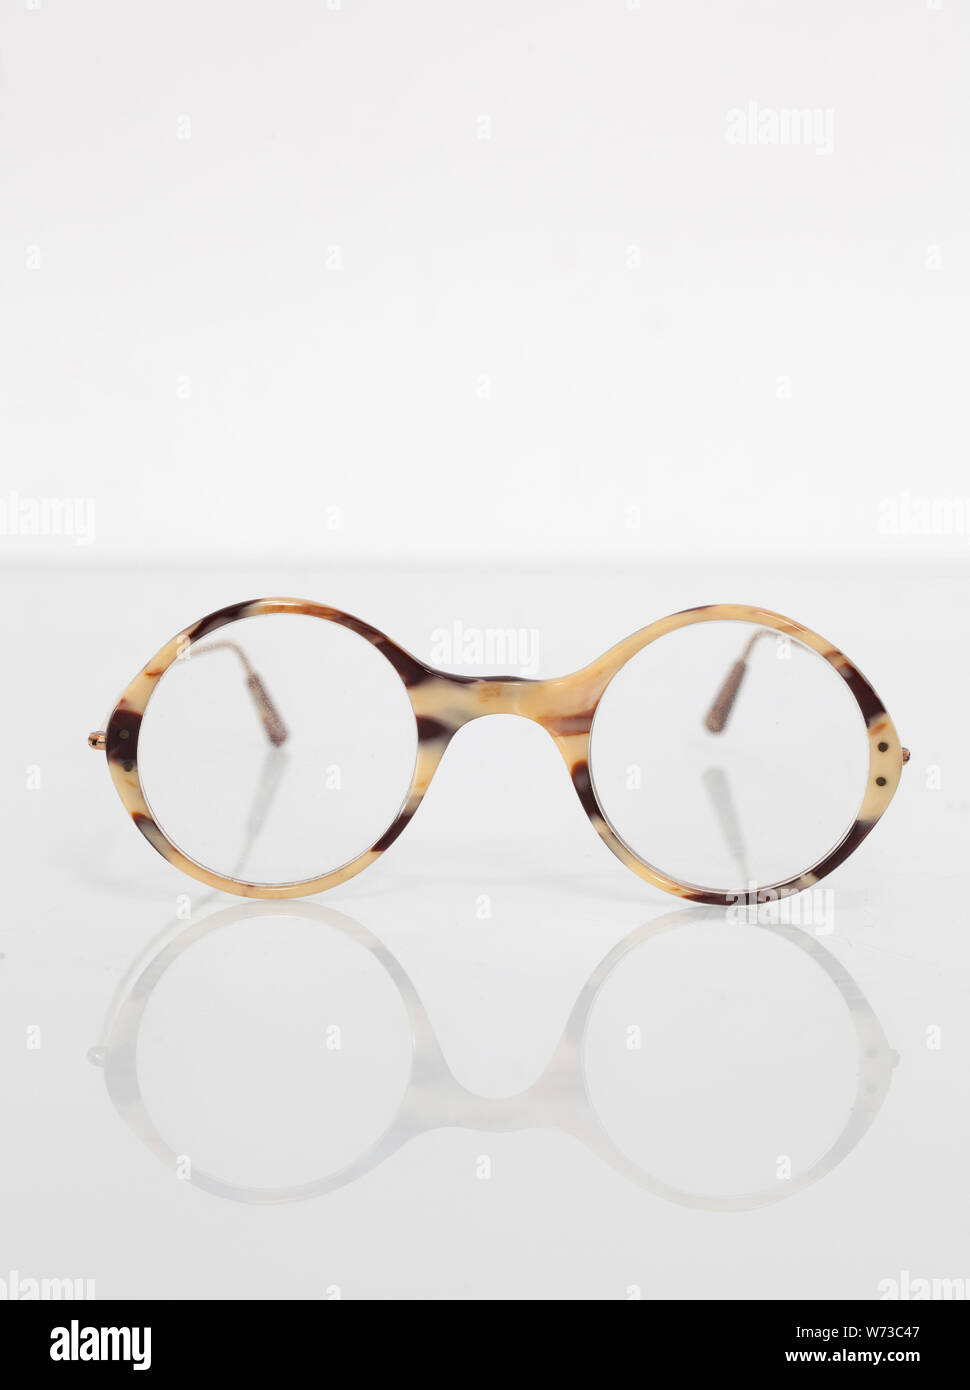 A Vintage Pair of Tortoiseshell Spectacles or Eyeglasses Stock Photo